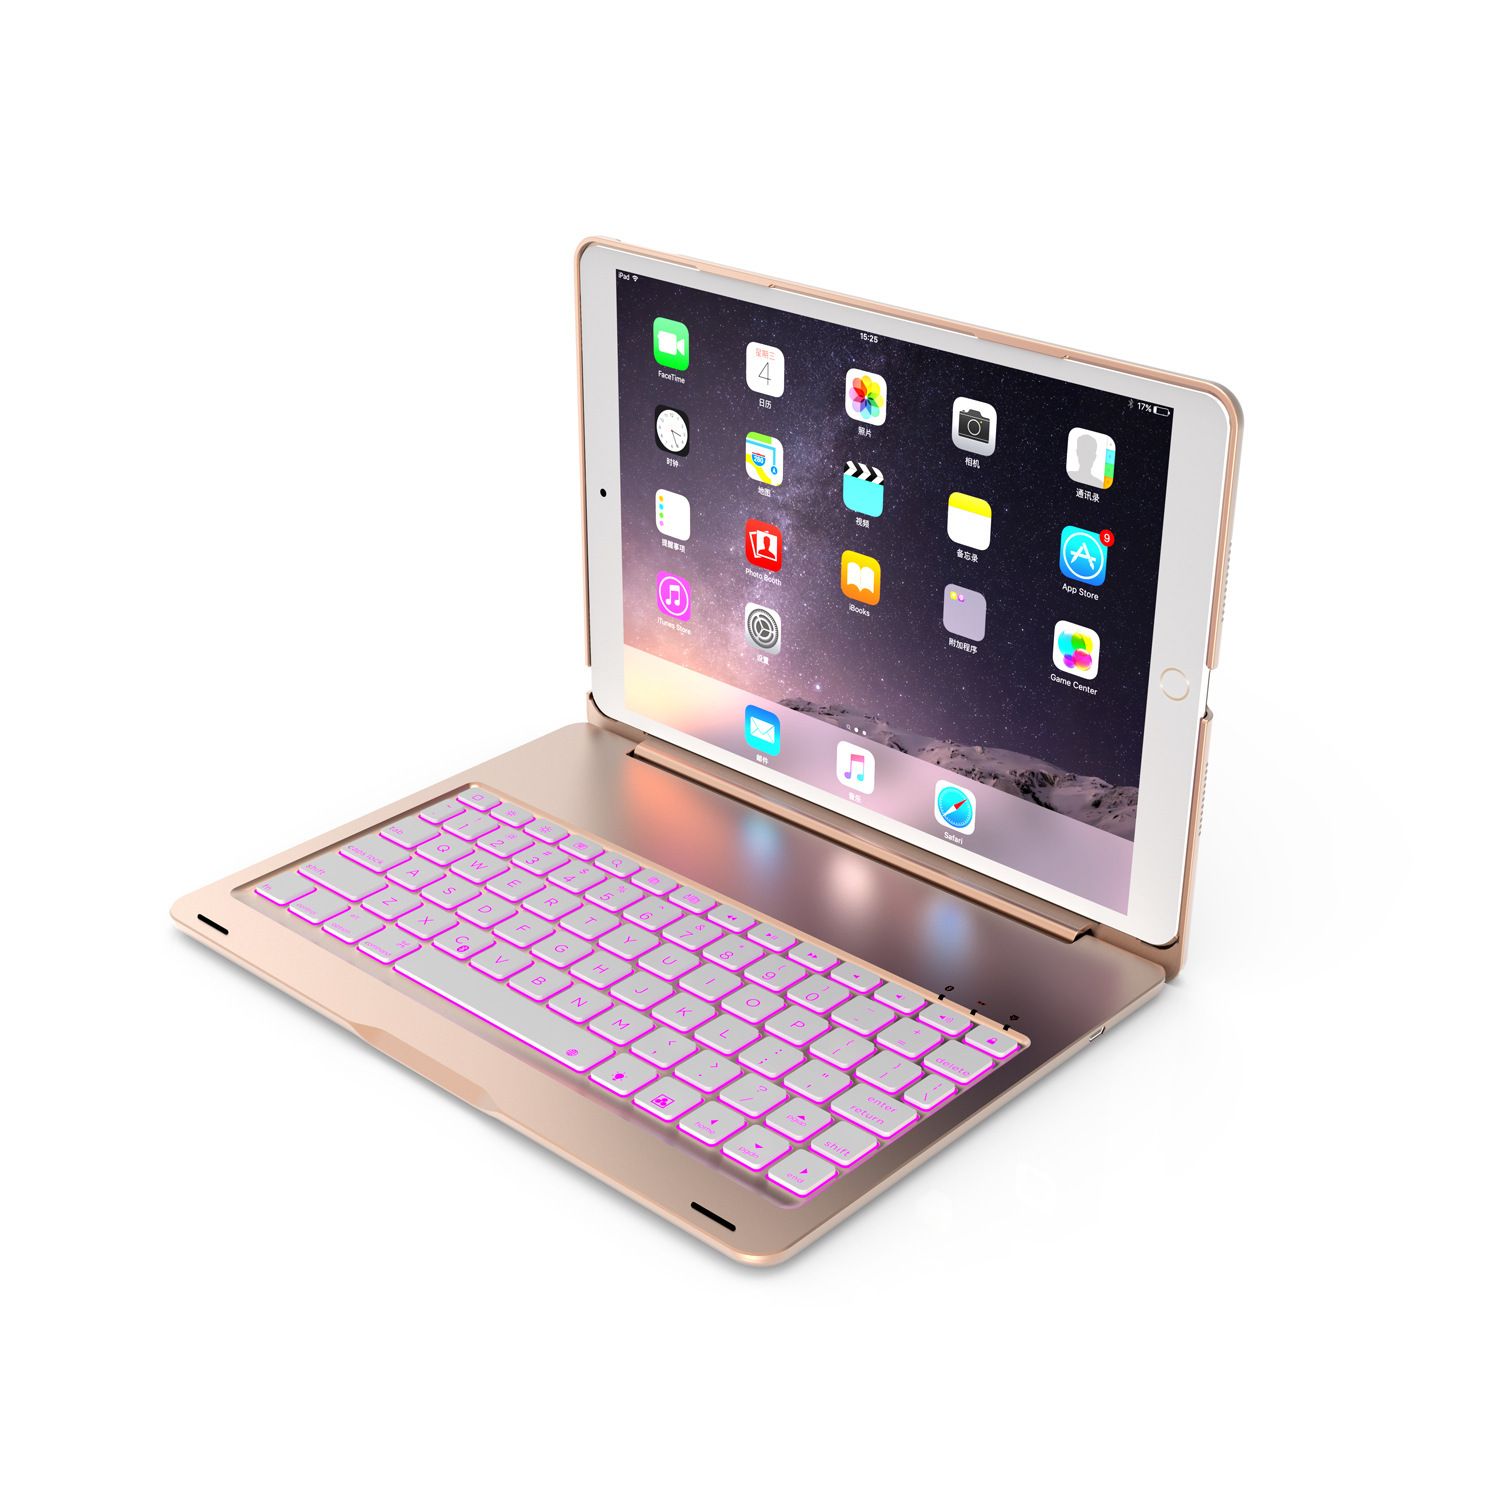 Ultra Thin Colorful Backlight Aluminum Flip Protective Cover Bluetooth Keyboard Case For Ipad Mini 2 3 4 Buy Tablet Cases 10 Inch Tablet Cases With Keyboard From Szlasleyled 45 23 Dhgate Com